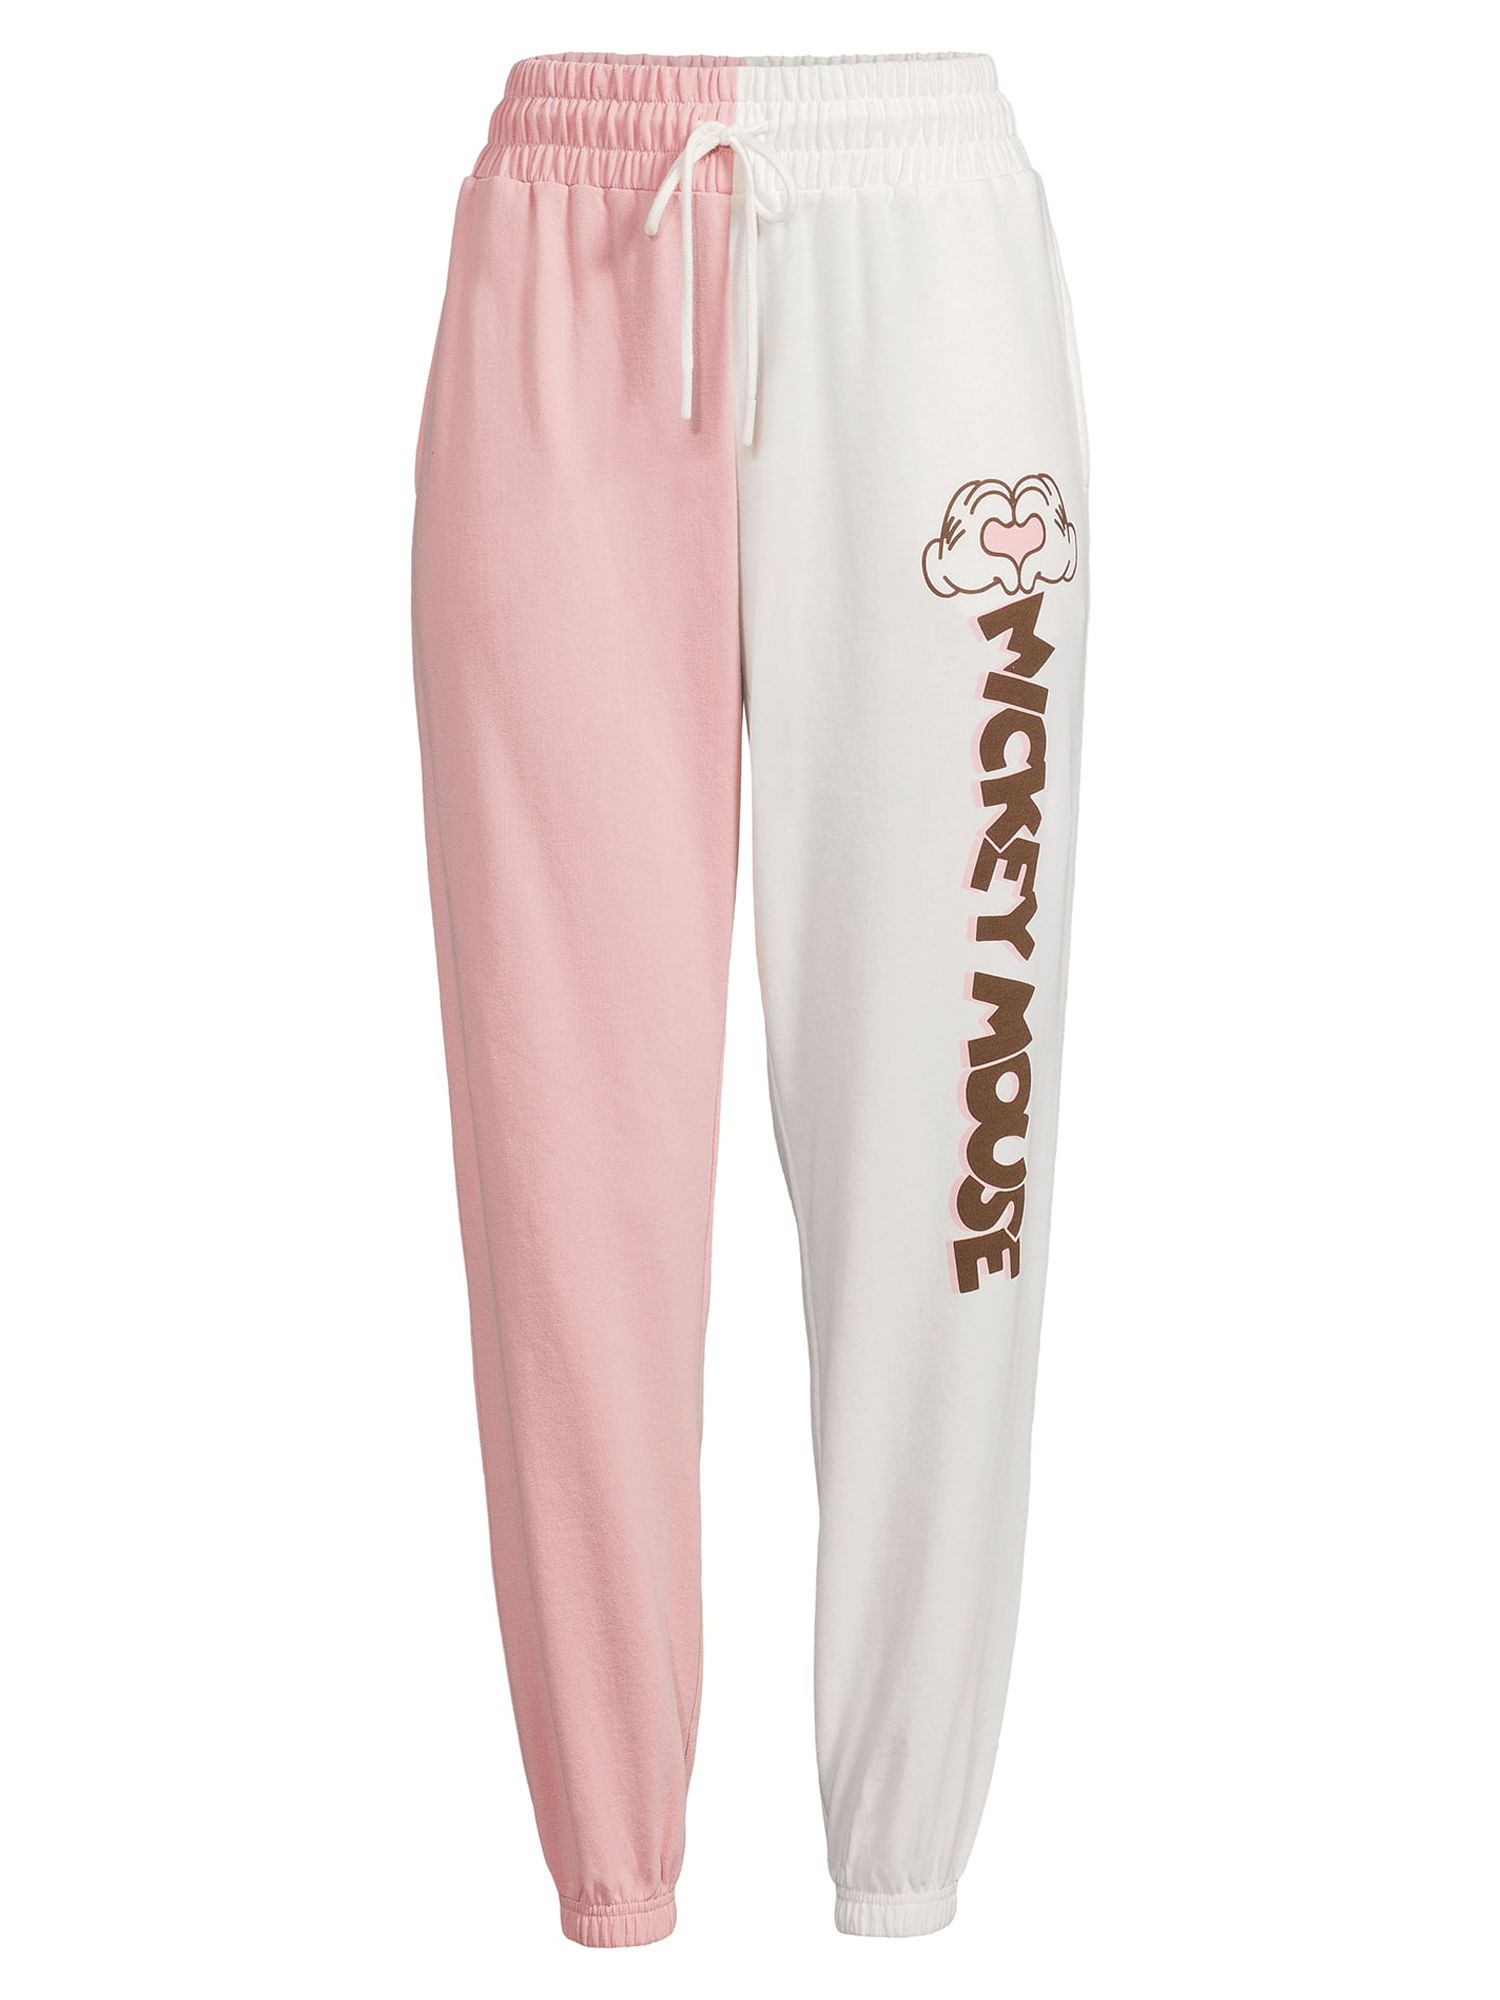 Disney Women's and Women's Plus Mickey Mouse Jogger Pants - image 5 of 5